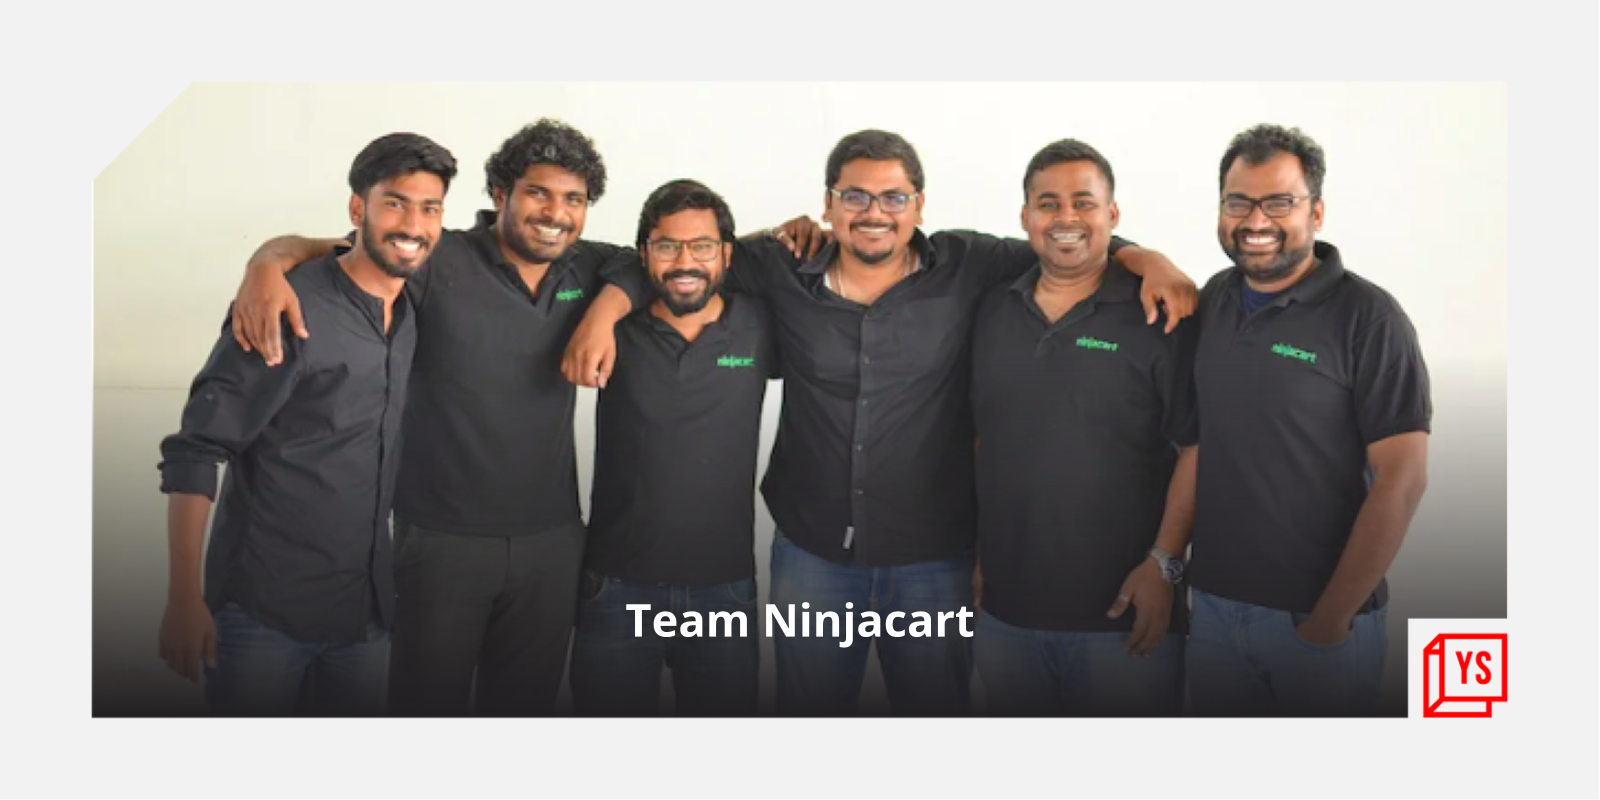 Ninjacart annouces that it will seed-fund agritech startups - in two days flat!